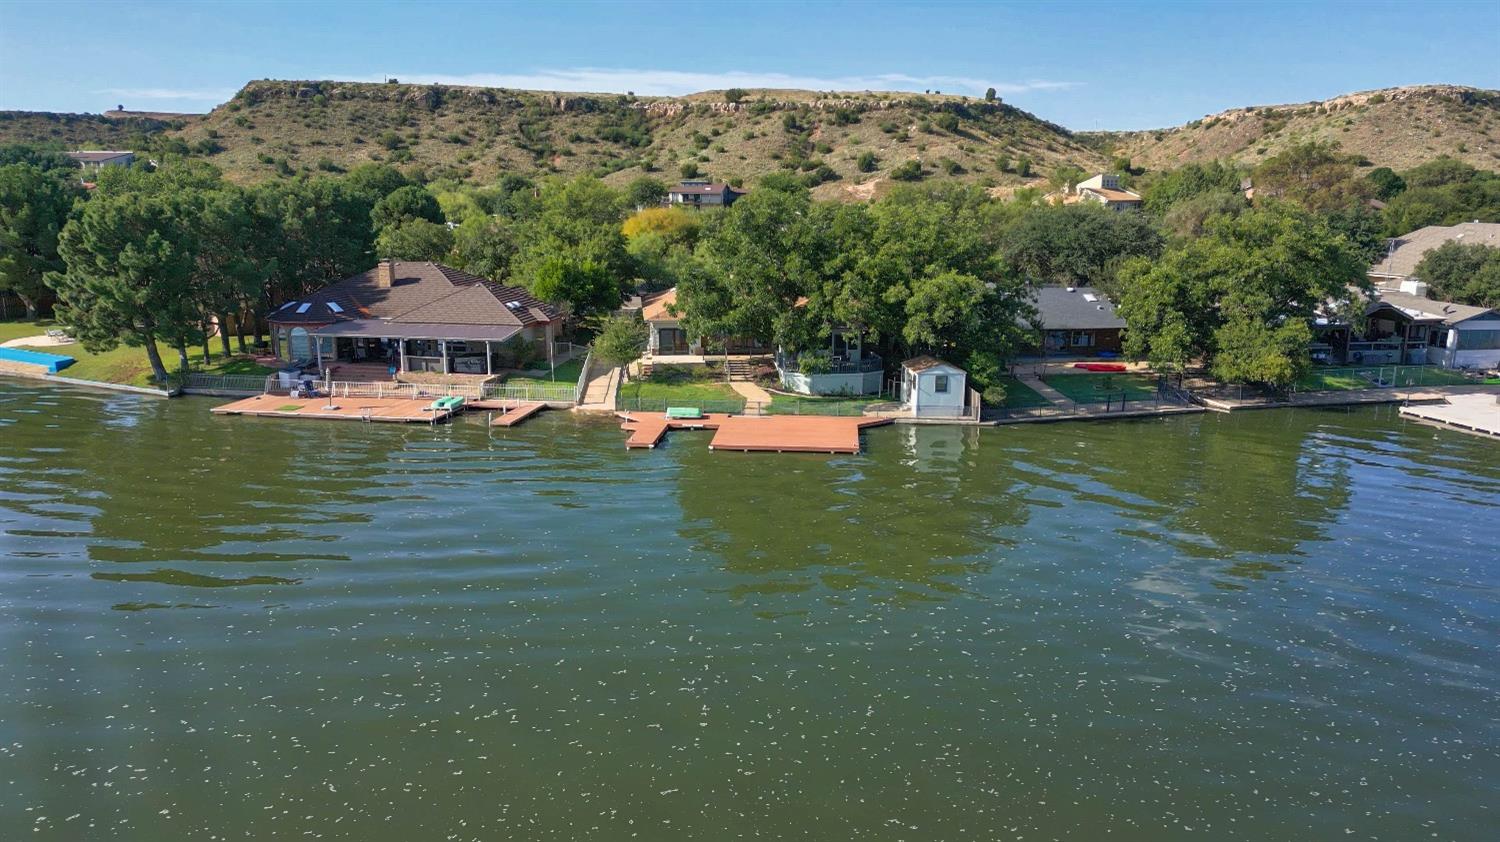 Welcome to your Lakeside Oasis!  Nestled in the heart of tranquility, this 3-bedroom, 2-bath home offers over 3,000 square feet of a rare opportunity to live in harmony with nature while enjoying the comforts of modern living. Located on the south shores of Lake Ransom Canyon, this property boasts breathtaking views of the glistening waters that compliment the West Texas sunsets.     The living room features a cozy fireplace, ideal for warming up on cool evenings while enjoying the serene lake view through large picture windows. Whether you're hosting a dinner party or preparing a quiet family meal, this chef's kitchen will inspire your culinary creativity. Just minutes away from Texas Tech, downtown, shopping, dining, and the Buddy Holly Hall. This property offers the perfect balance of serenity and convenience.  Don't miss your chance to own this slice of paradise. Schedule your viewing today and make this dream home your reality.